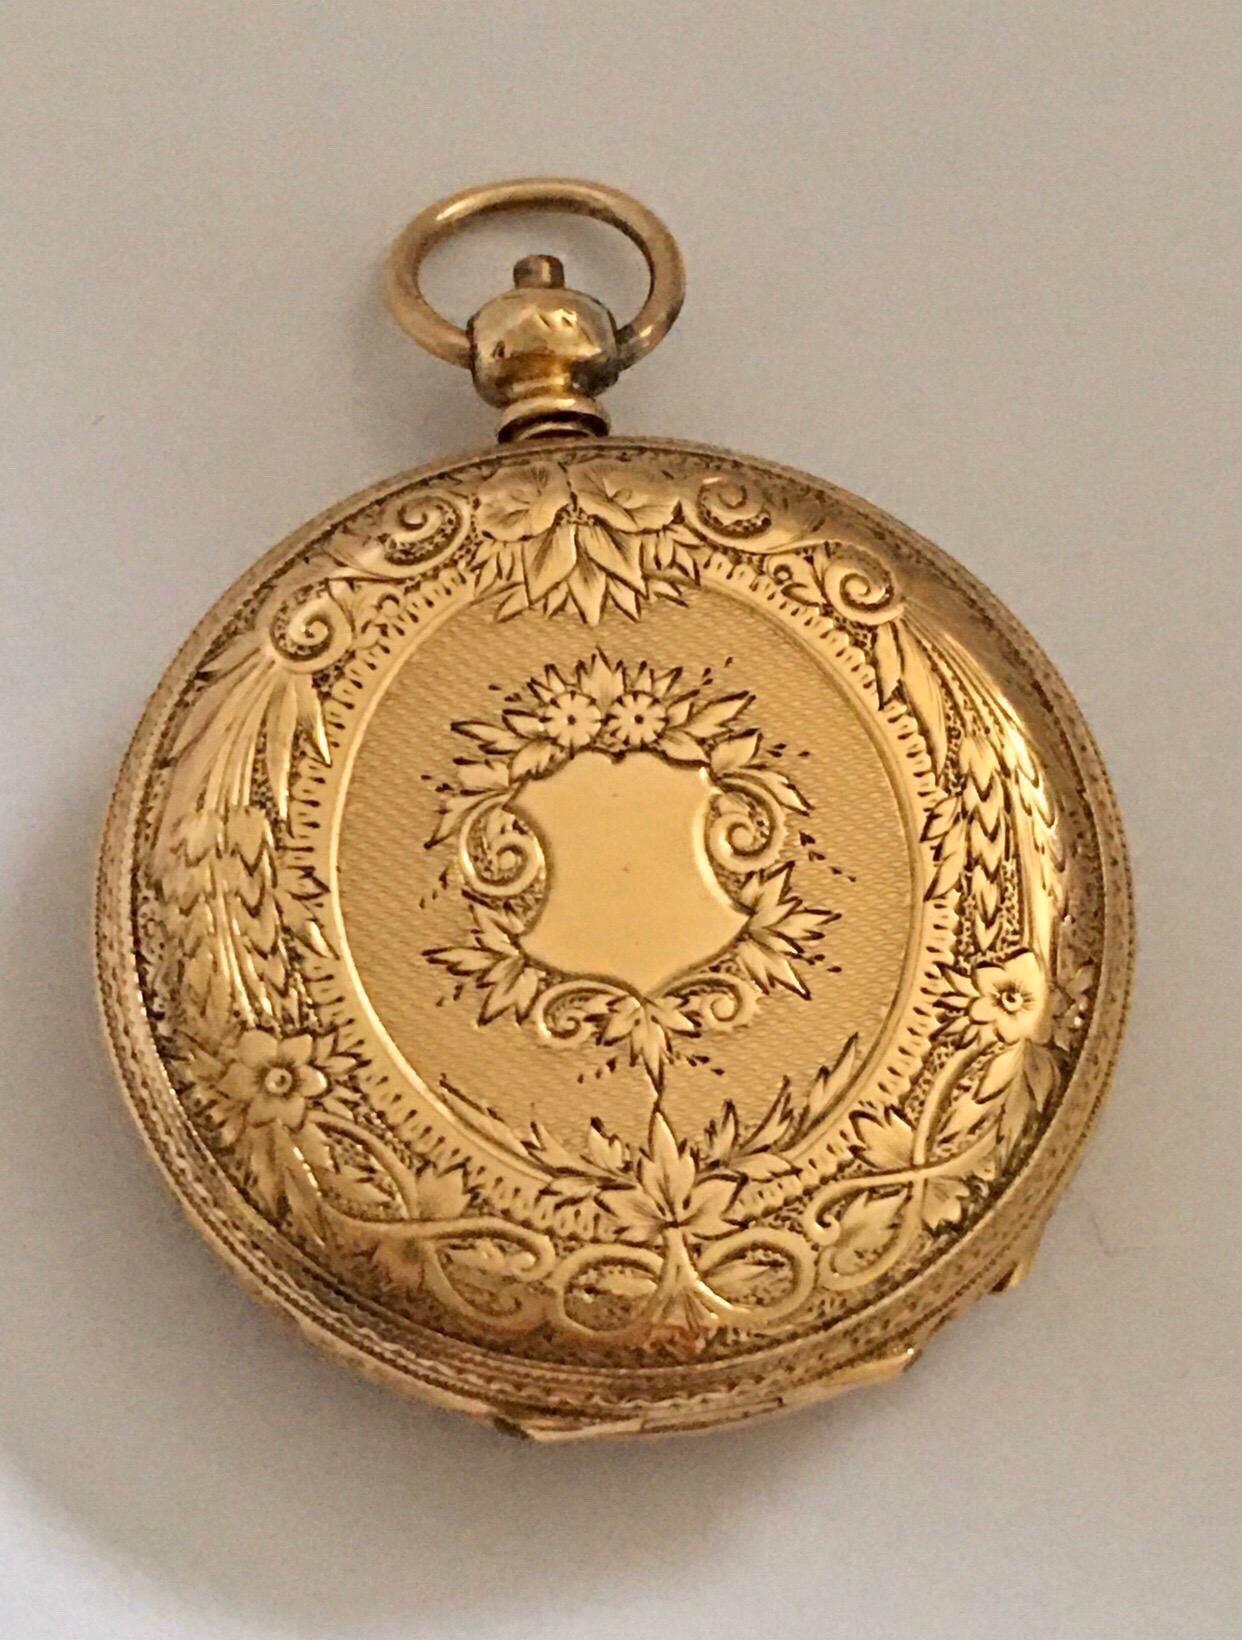 This Beautiful Antique Gold pocket watch is working and its is ticking well. Visible scratch on the gold dial as shown. Please study the images carefully as form part of the description.